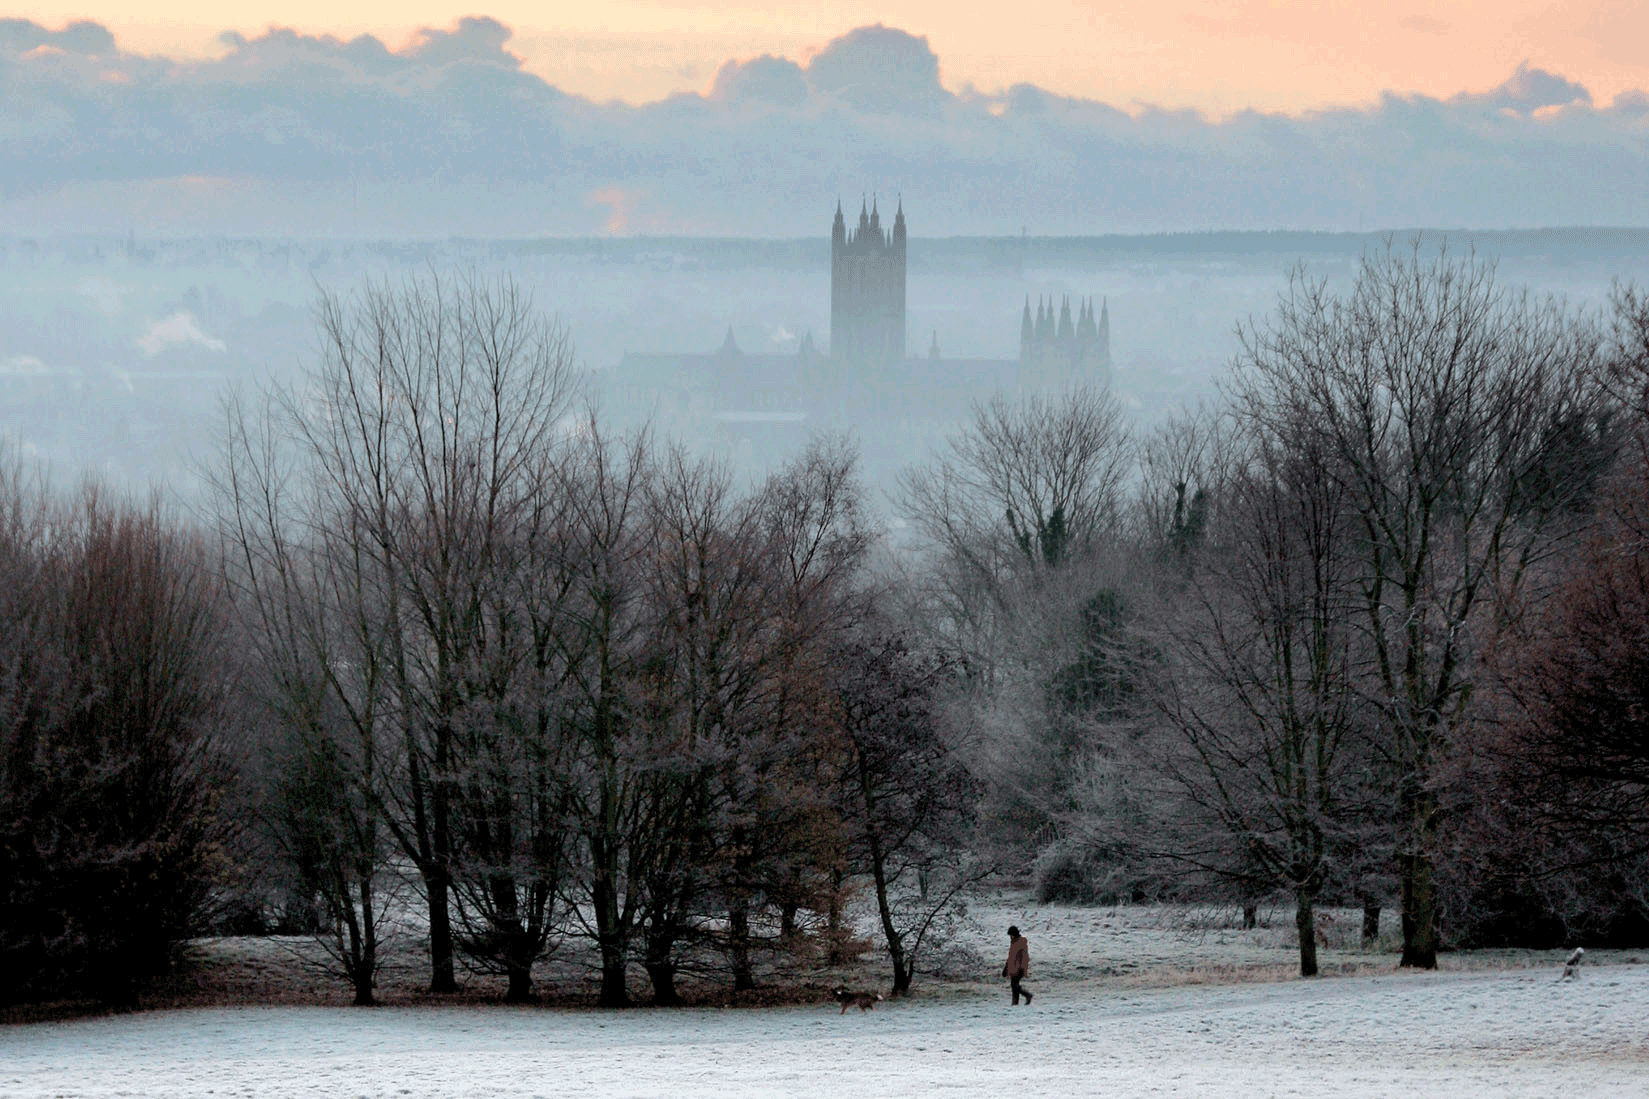 Frosty campus with cathedral in background